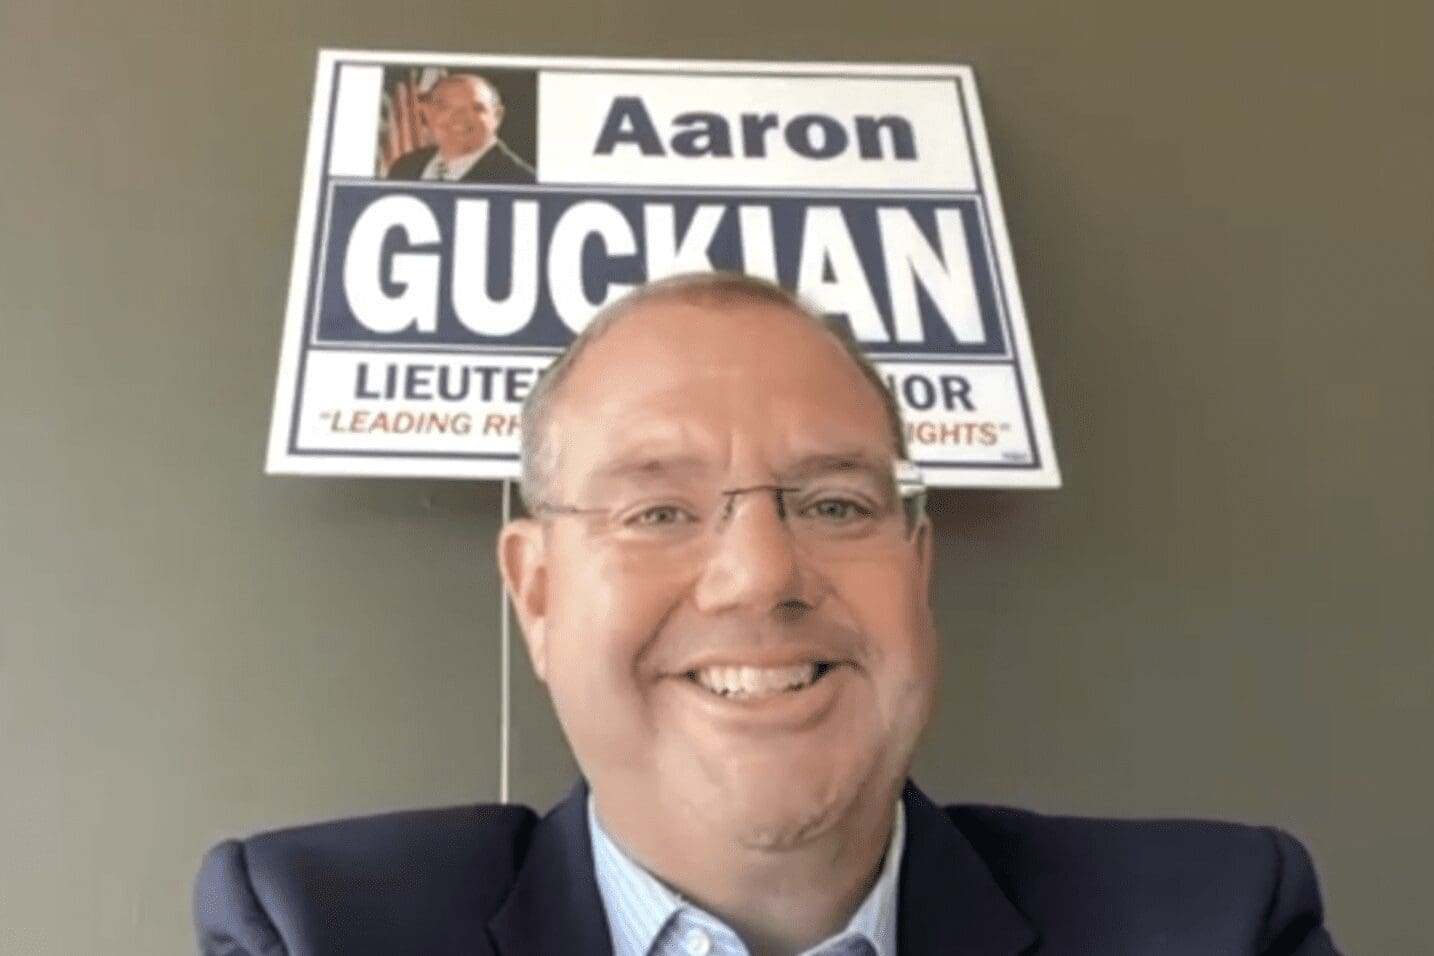 A man in a suit and tie is standing in front of a sign that says aaron guccian.